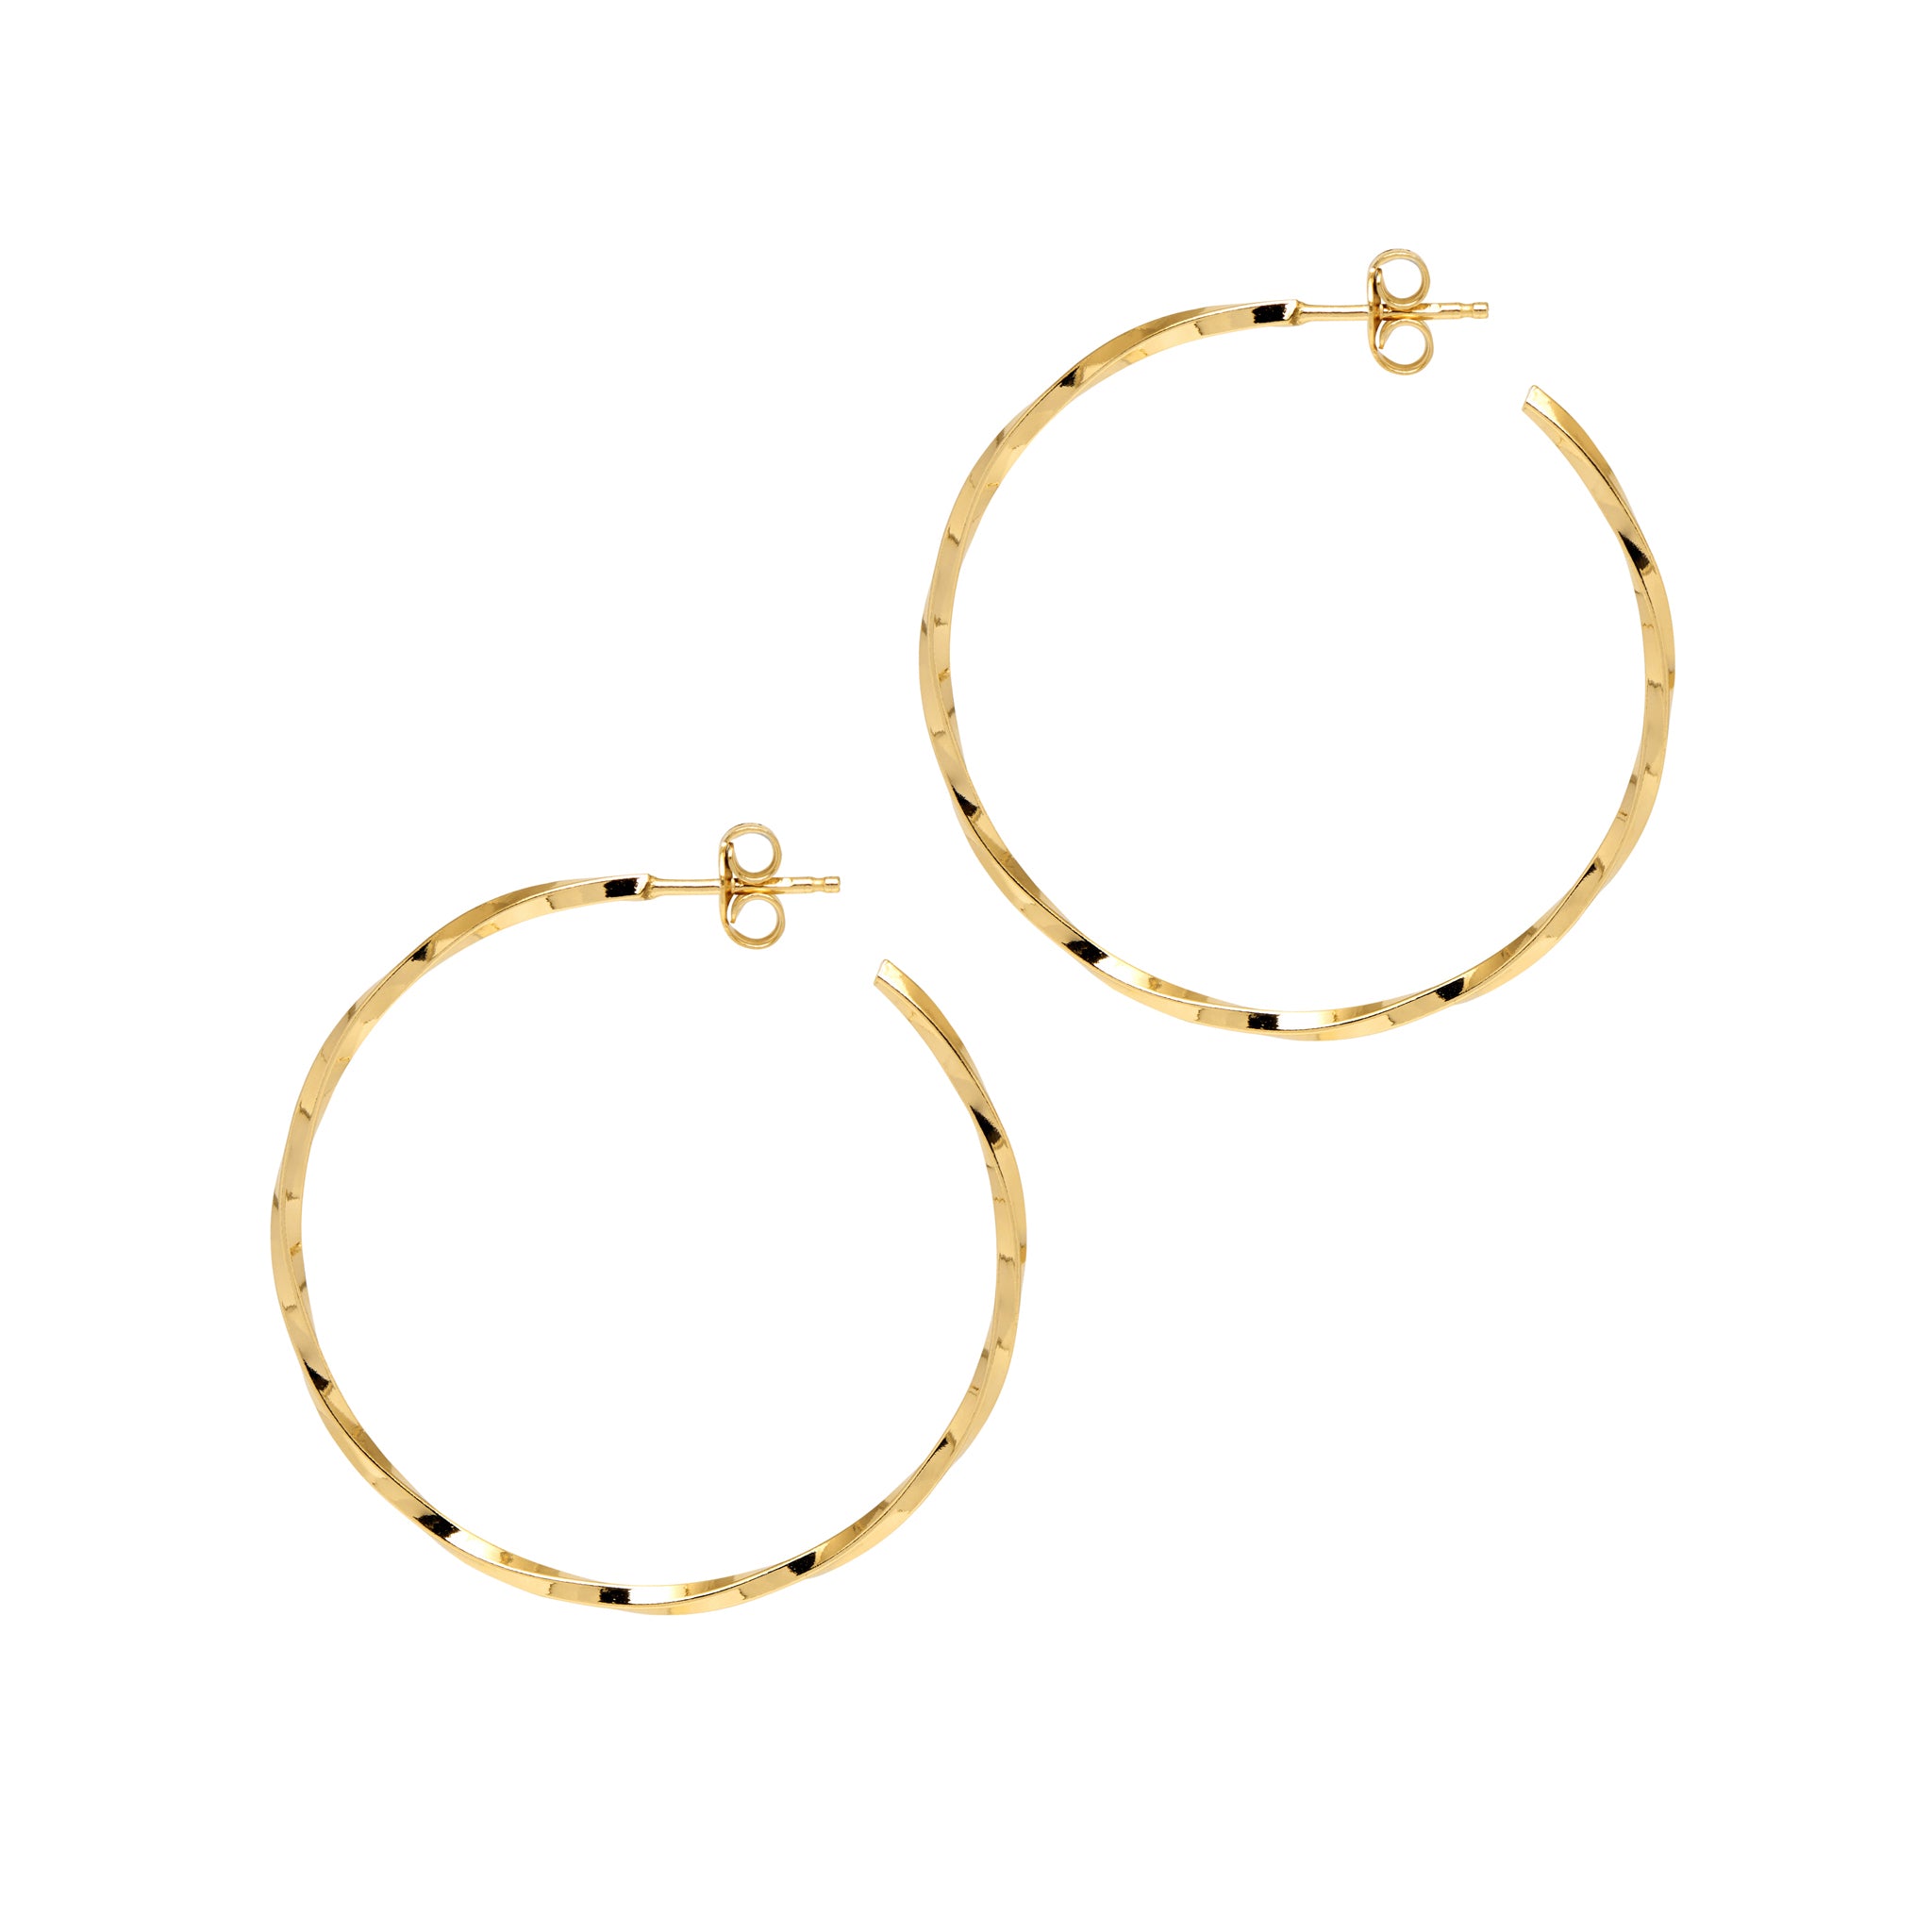 Lago di Como - Gold, Silver, Rose Gold - THE HOOP STATION